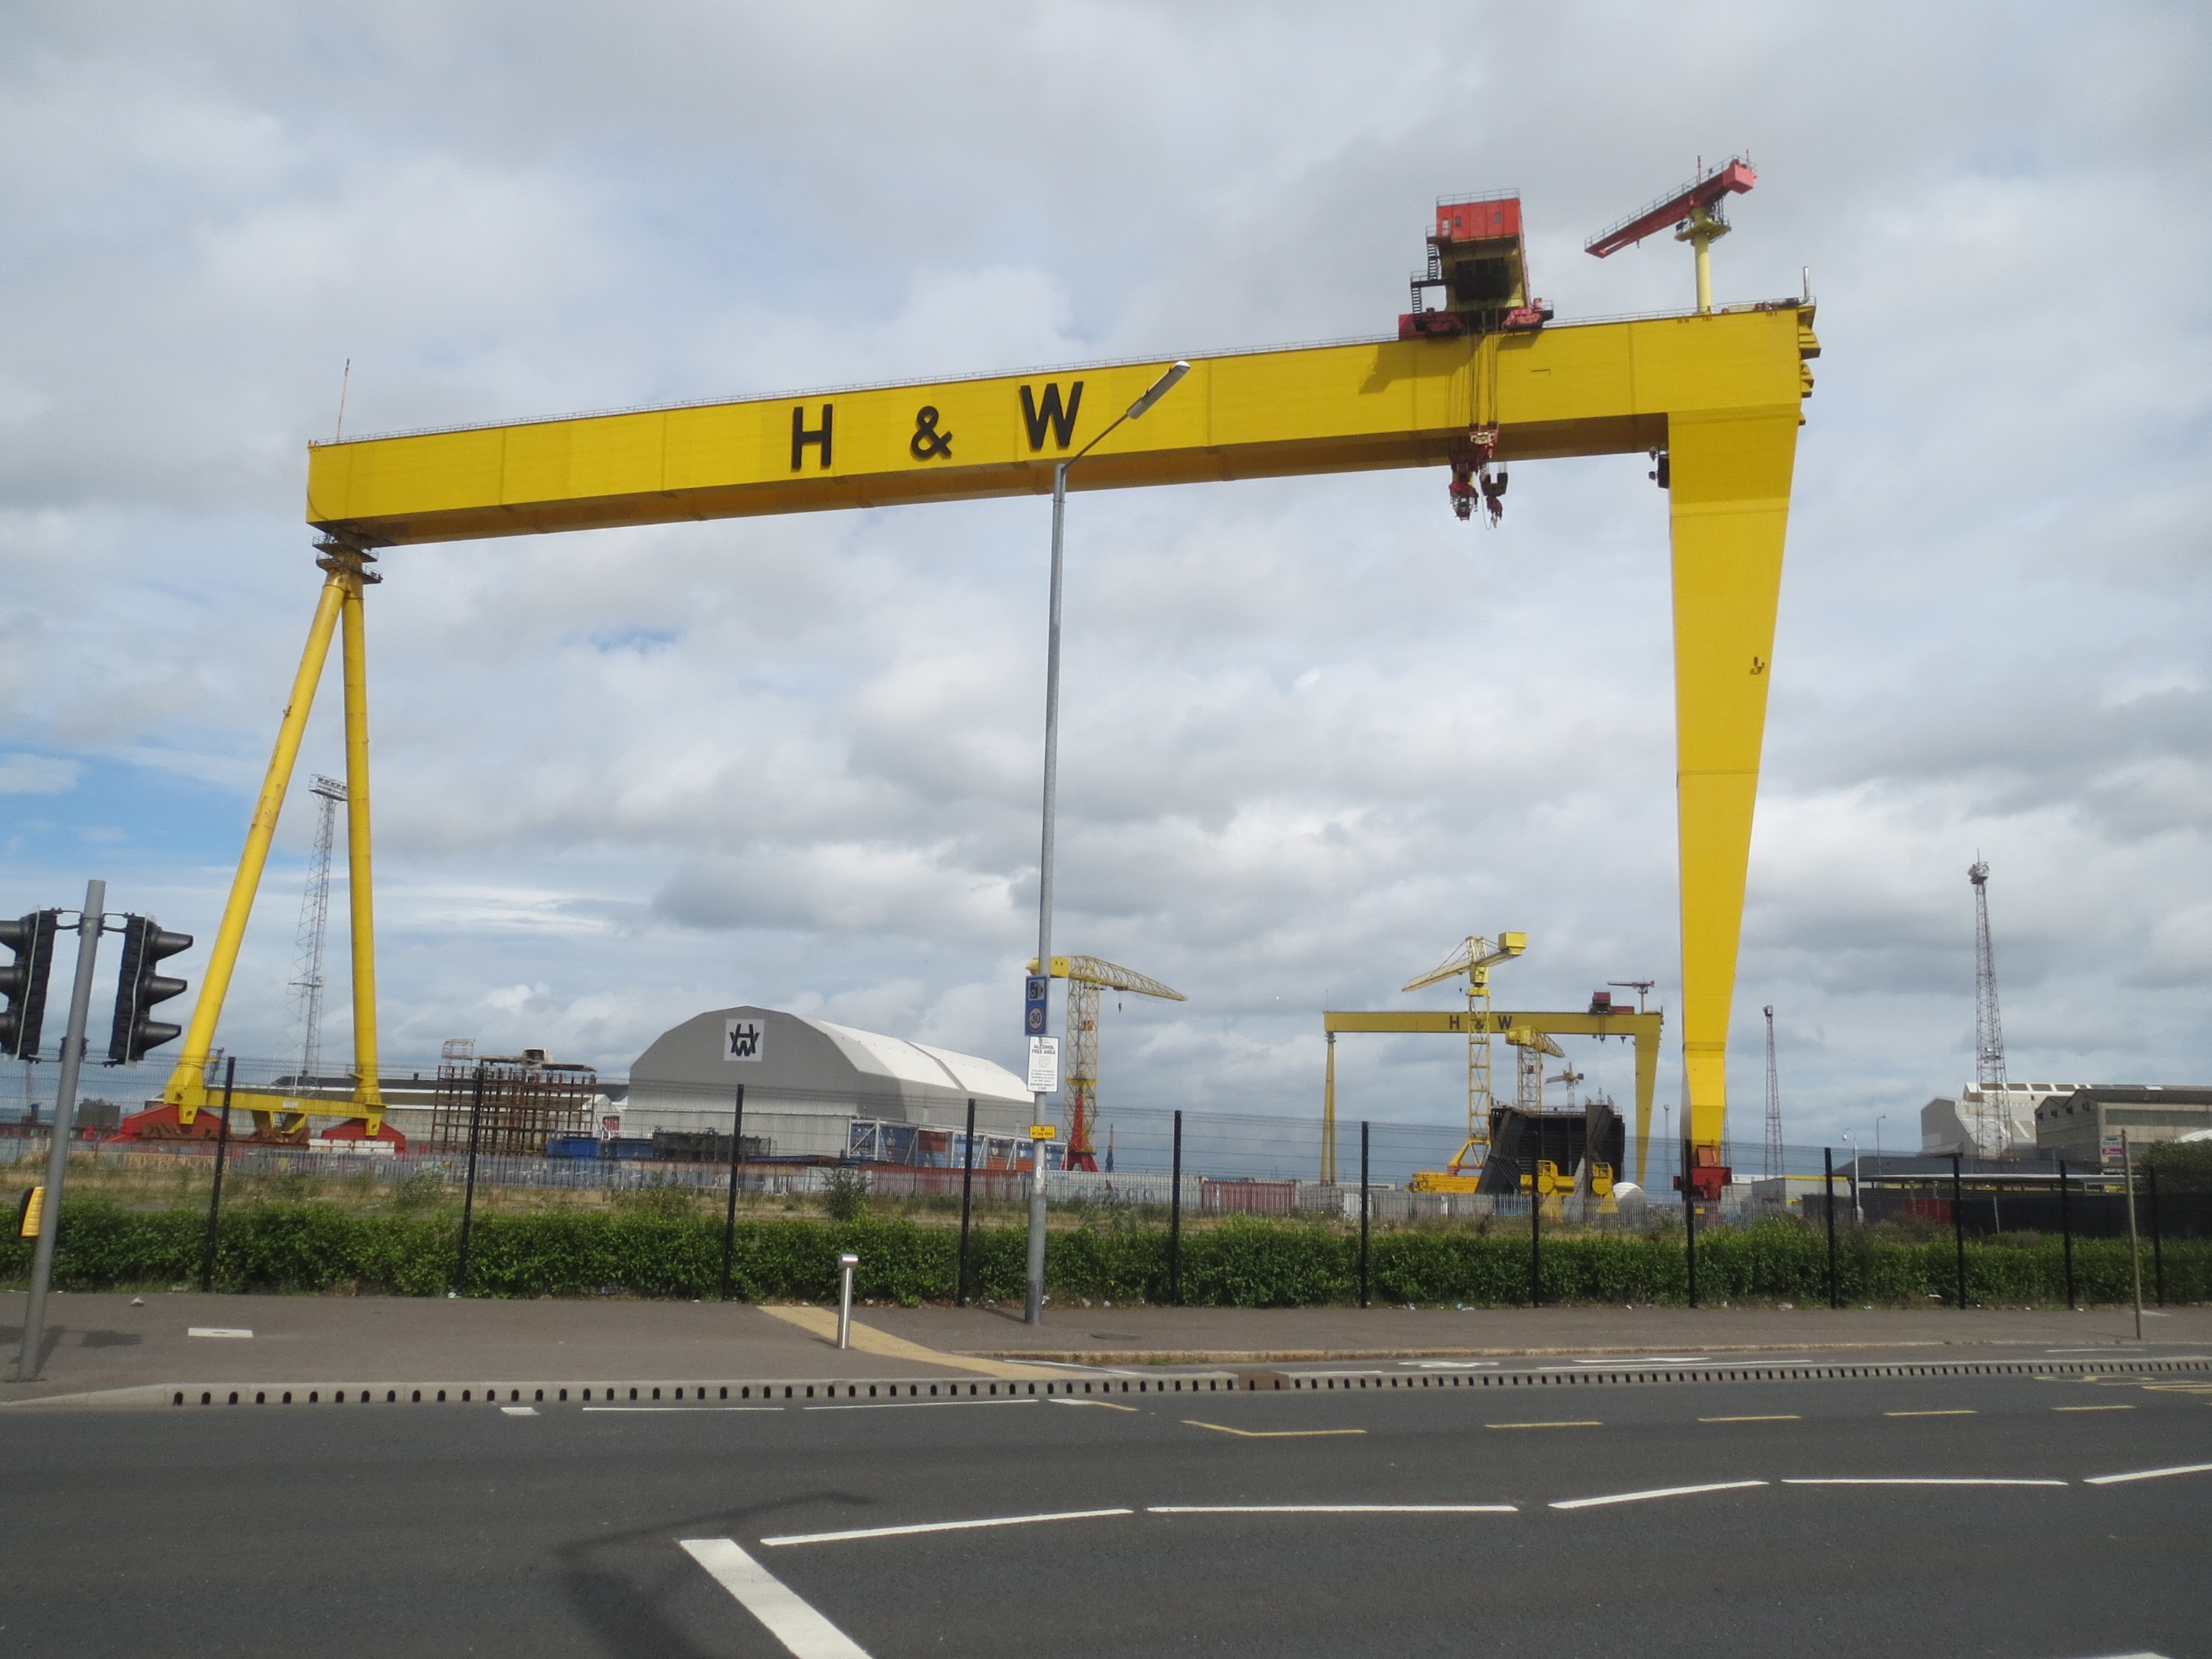 Harland_and_Wolff_Cranes